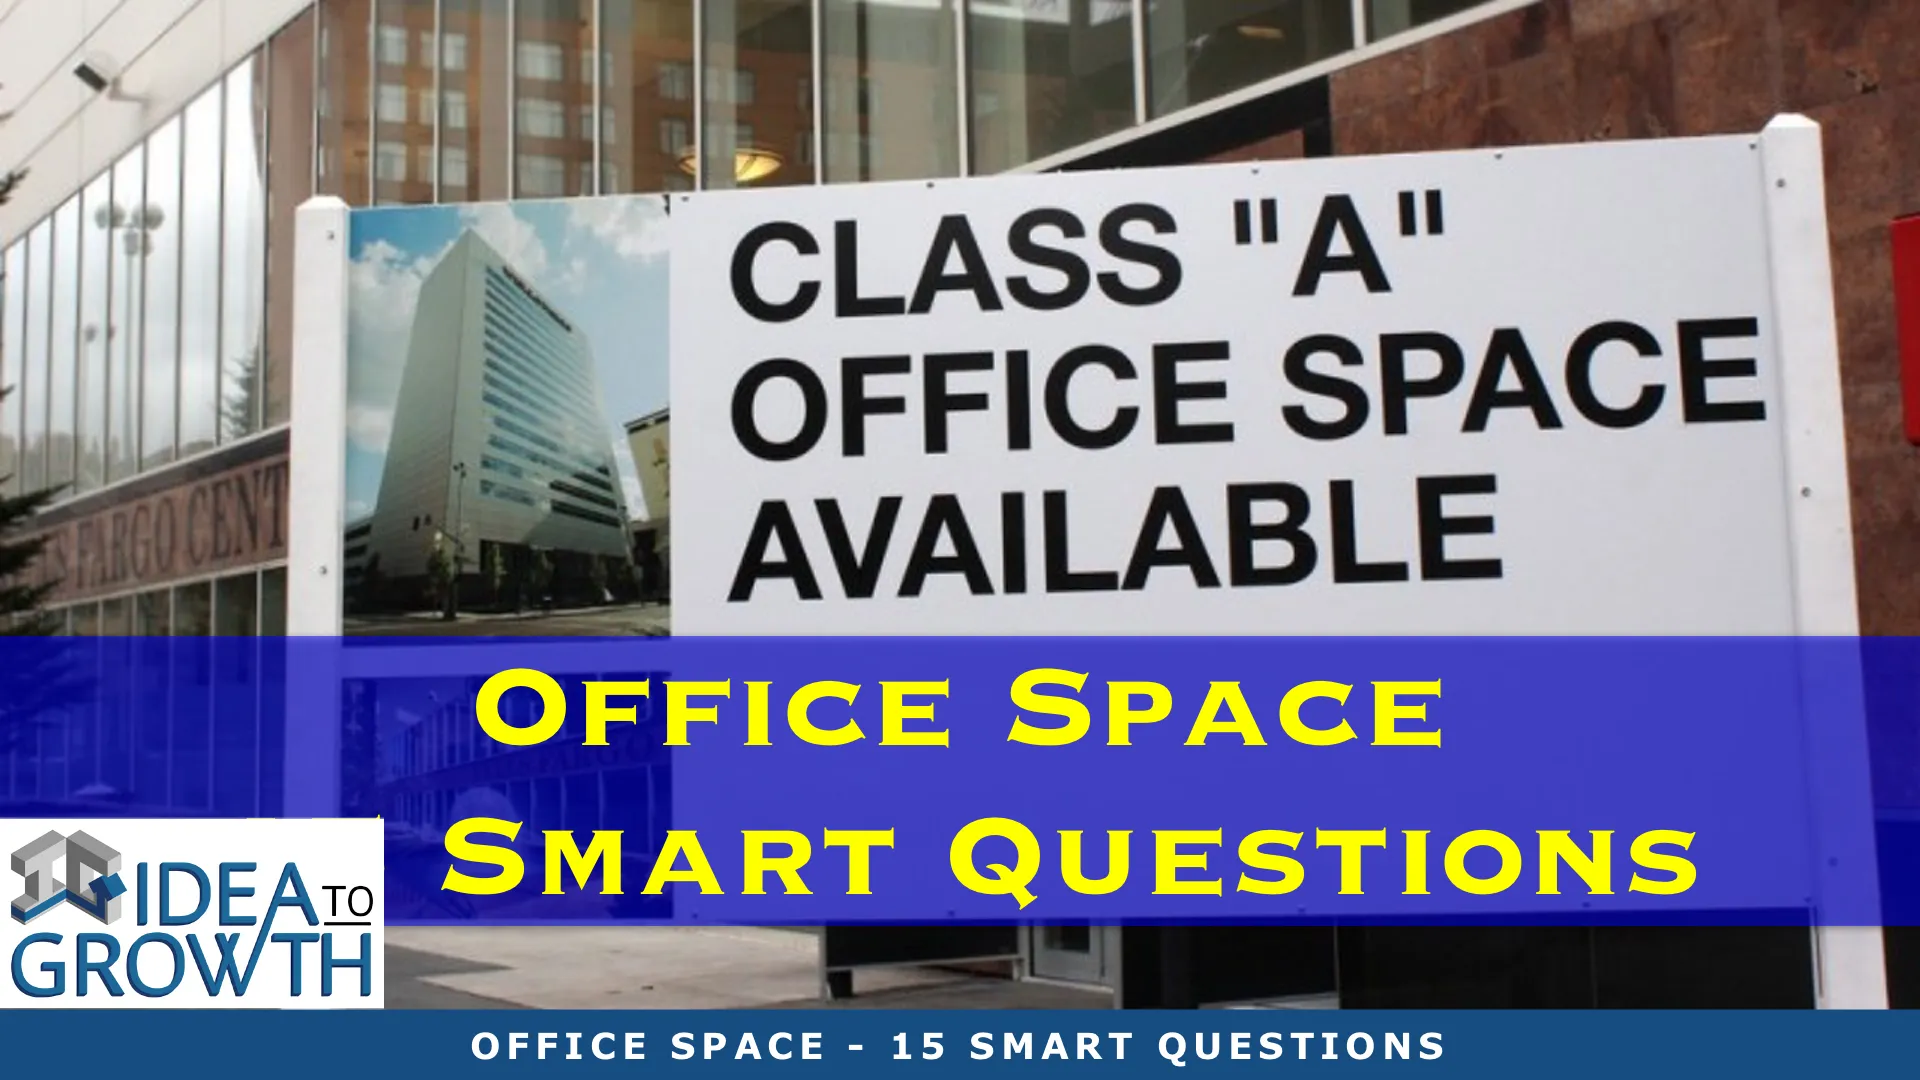 OFFICE SPACE - 15 SMART QUESTIONS